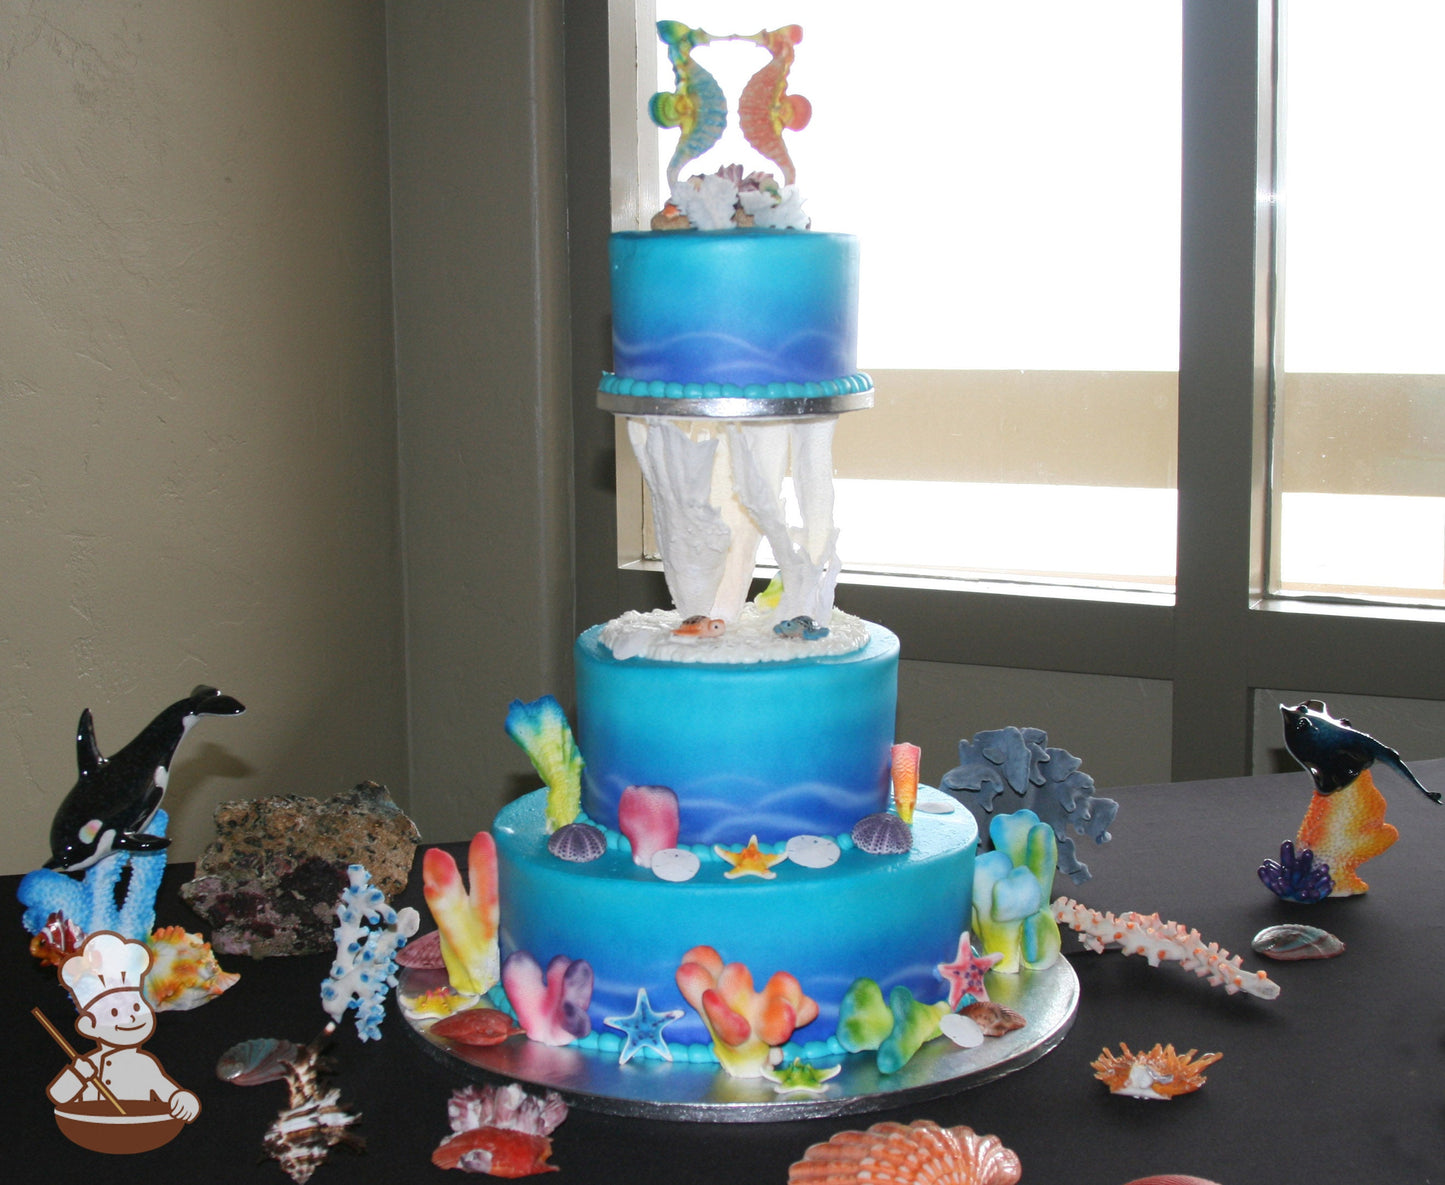 3-tier cake decorated with coloring to look like under the sea and the top tier is held up by pillas that look like coral.